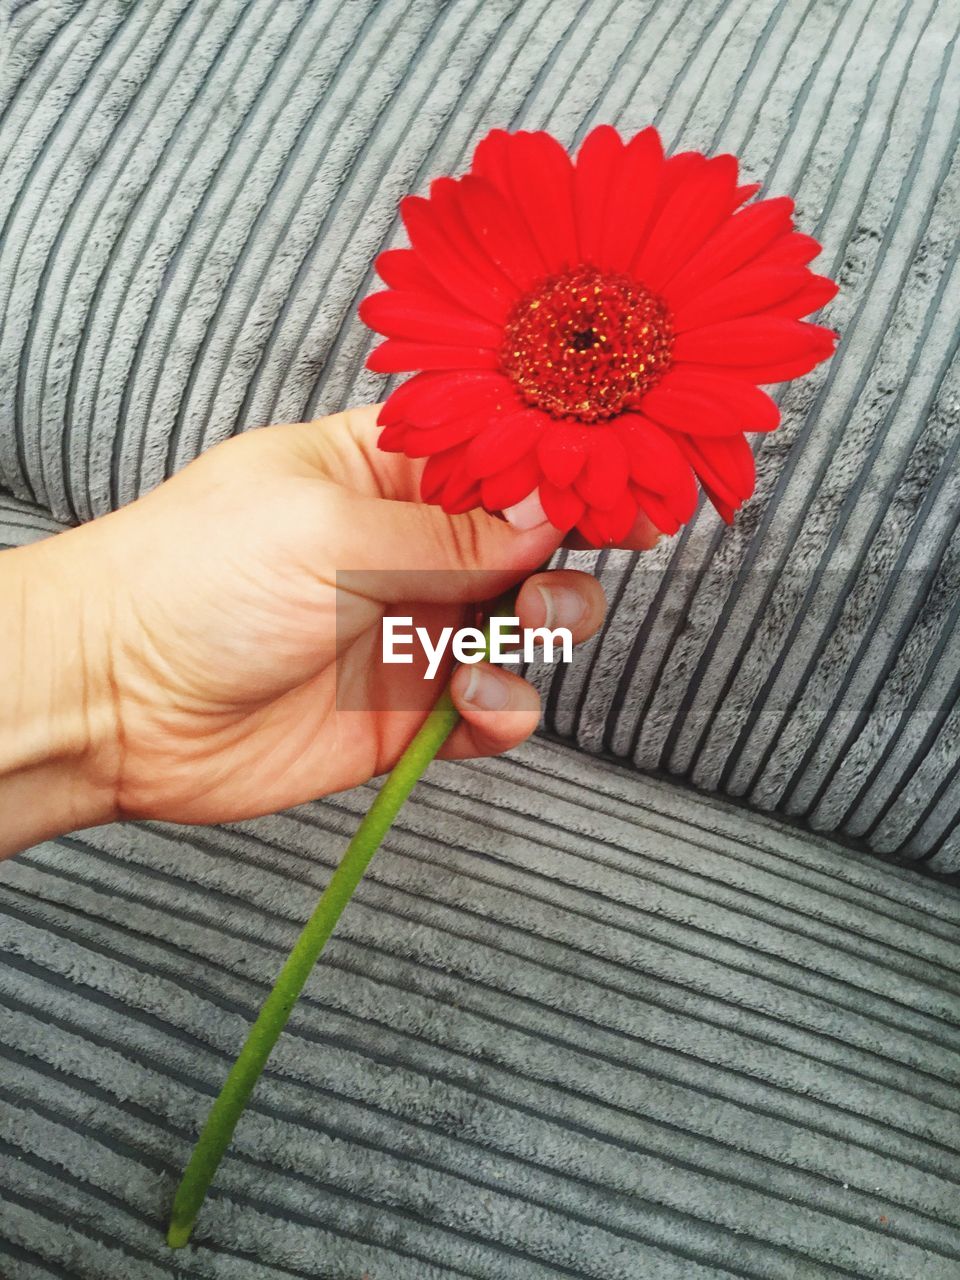 Cropped image of hand holding red gerbera